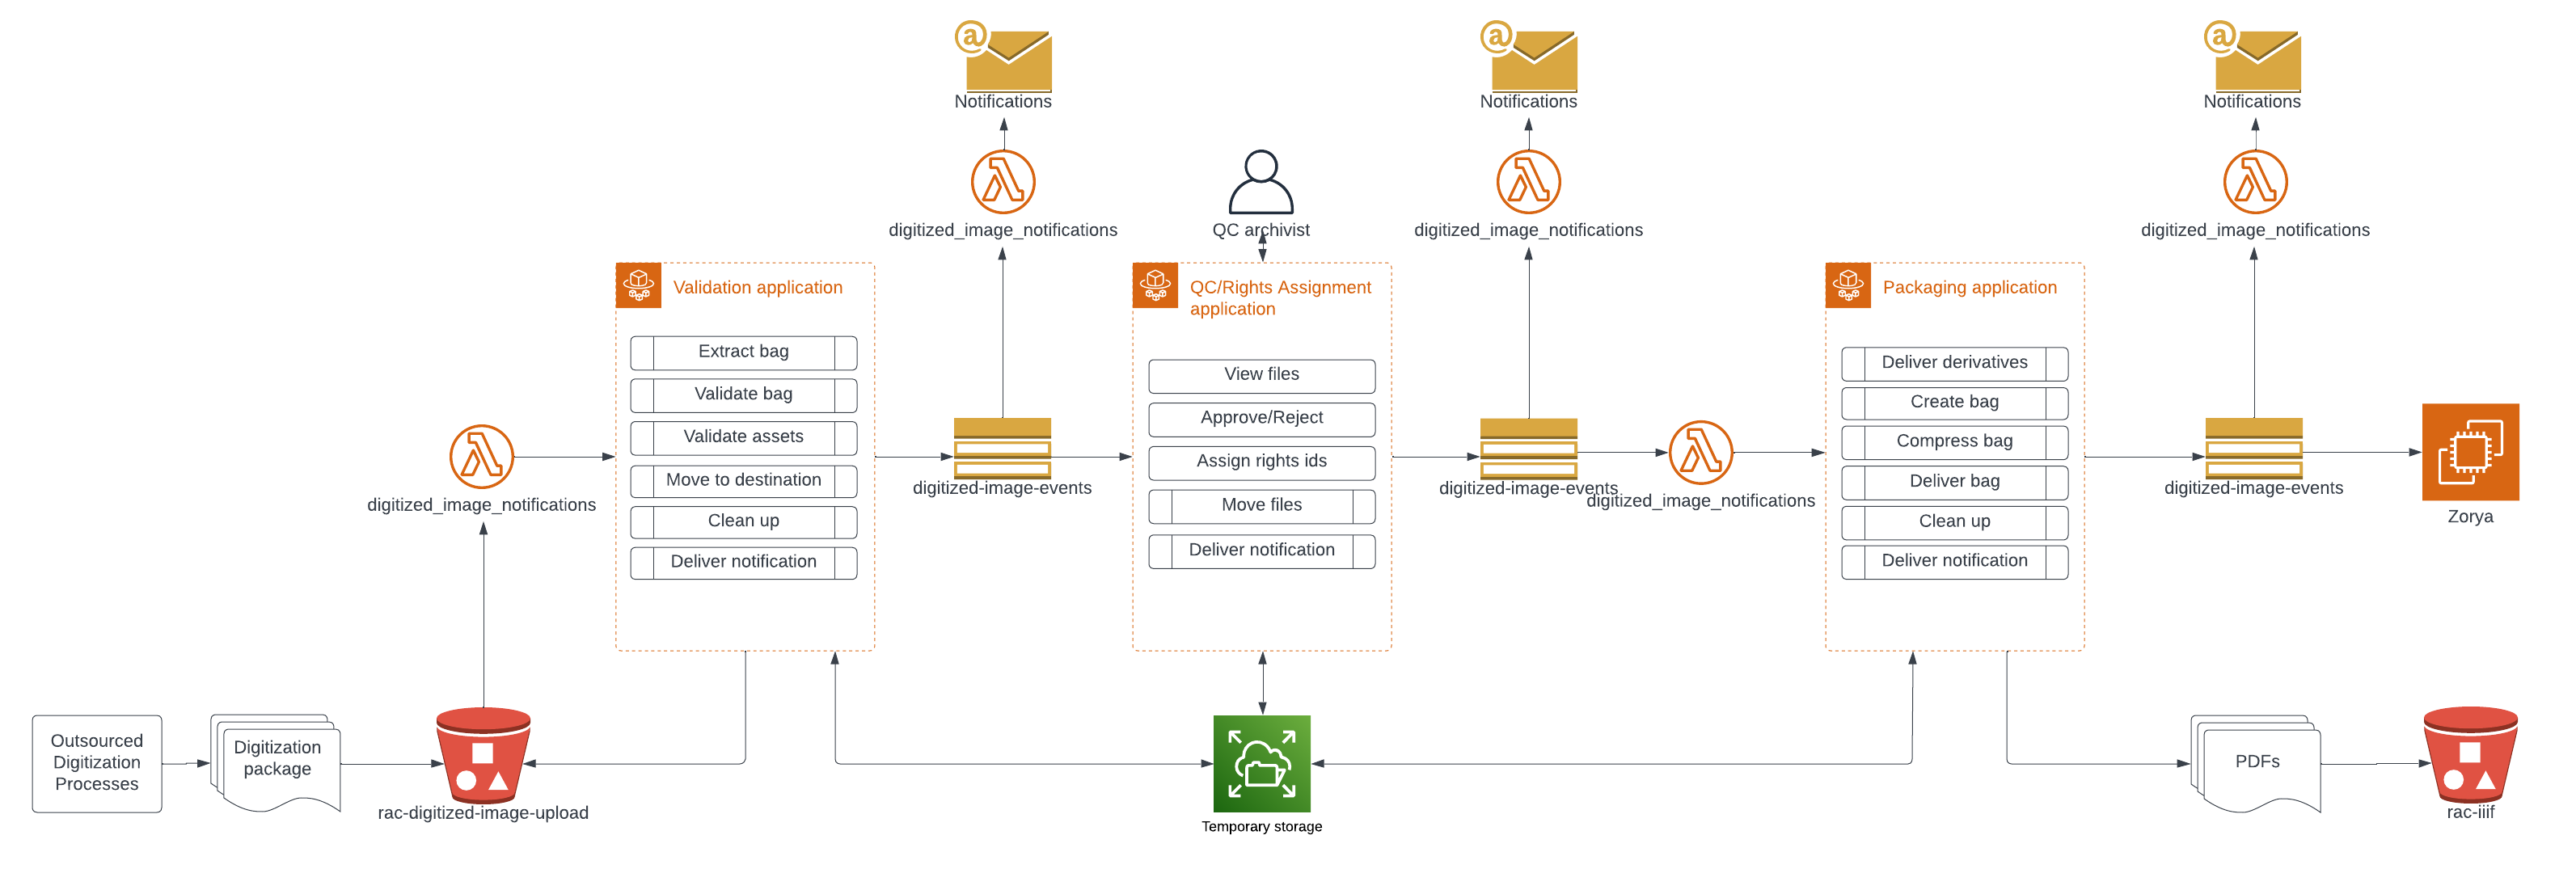 Figure 1. The infrastructure which processes outsourced digitized image and text content is composed of several AWS services.